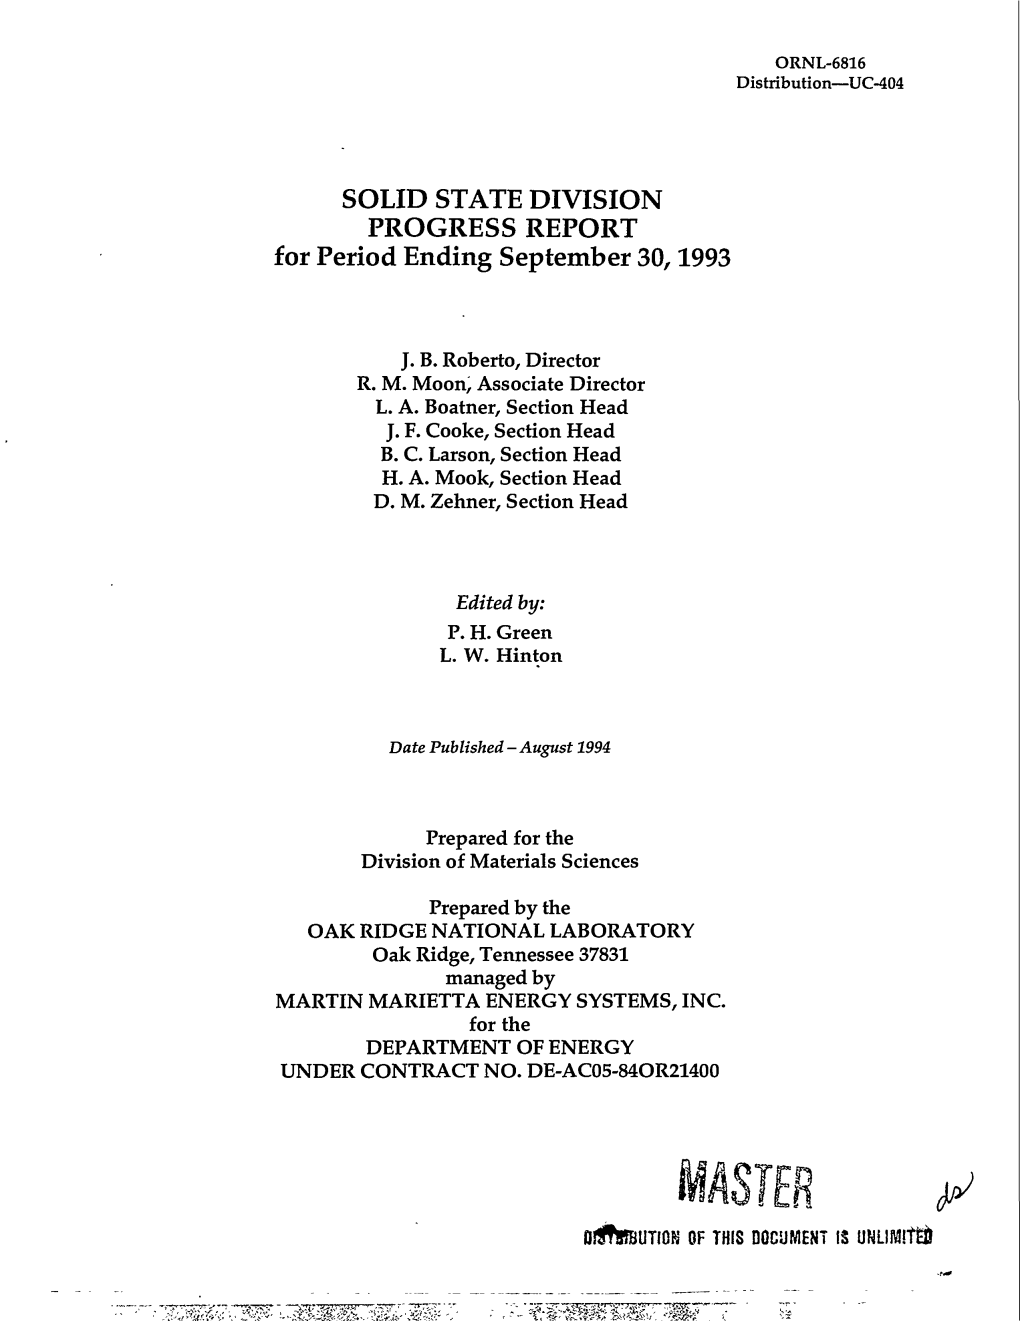 SOLID STATE DIVISION PROGRESS REPORT for Period Ending September 30,1993